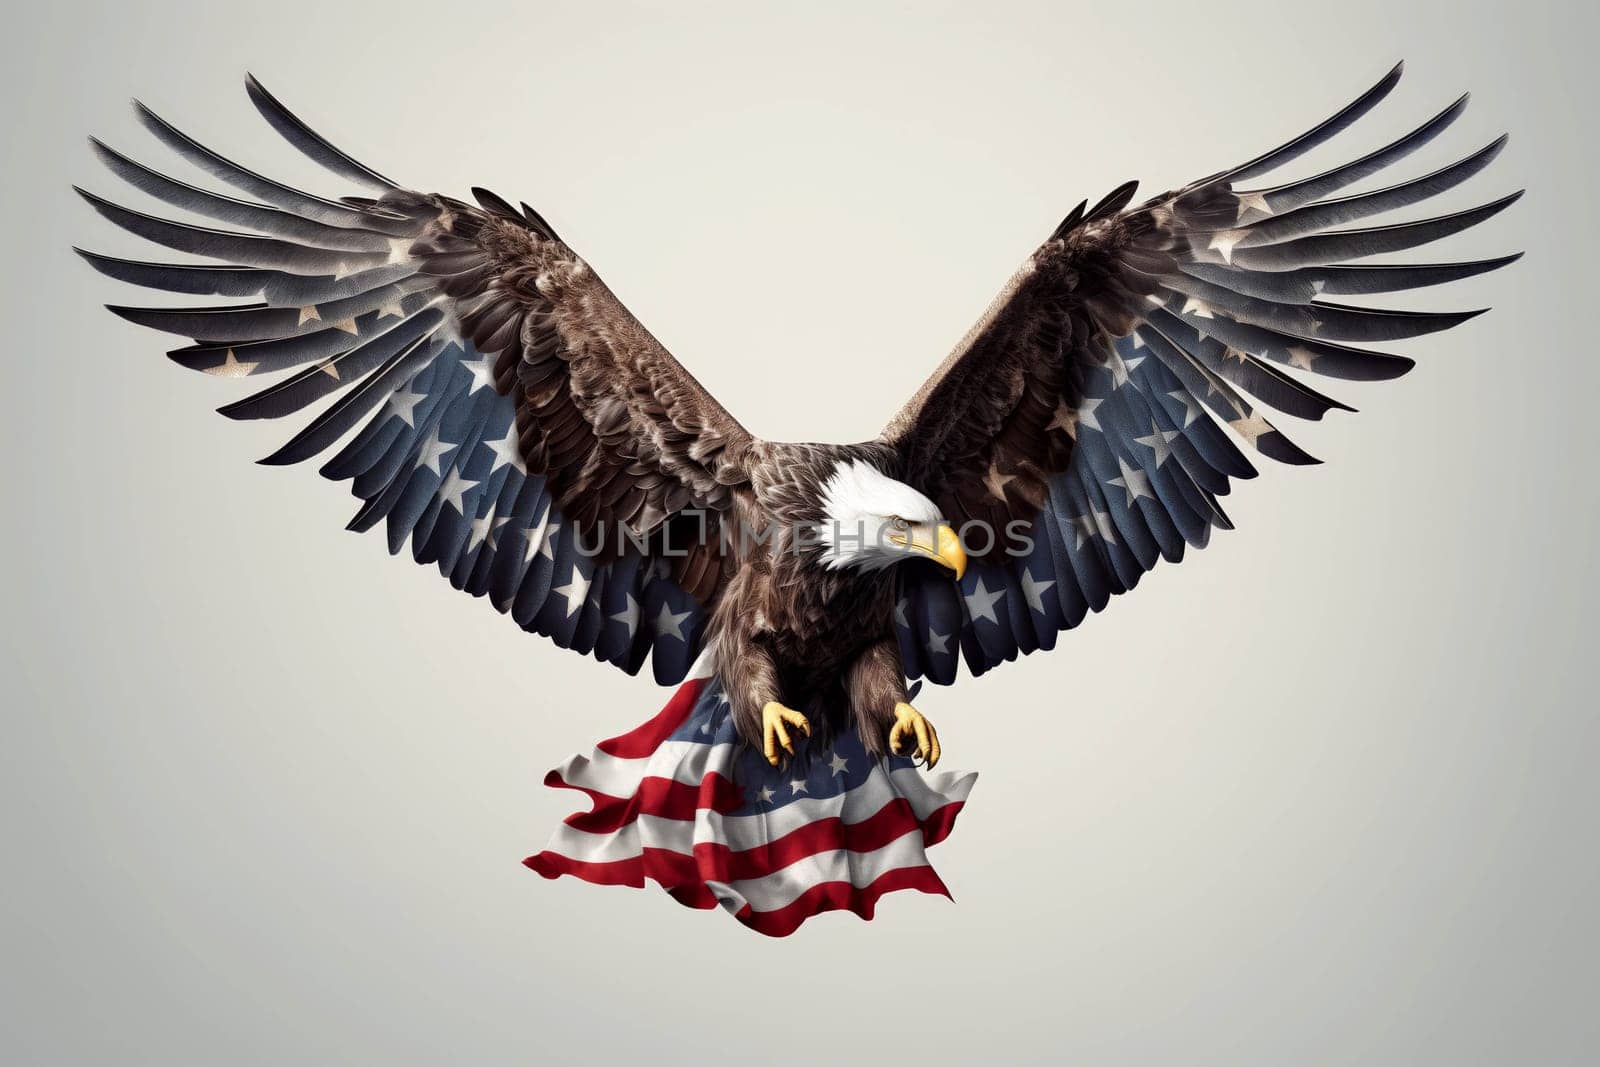 A large eagle with a red, white, and blue American flag in its talons. The eagle is soaring through the sky, representing freedom and strength